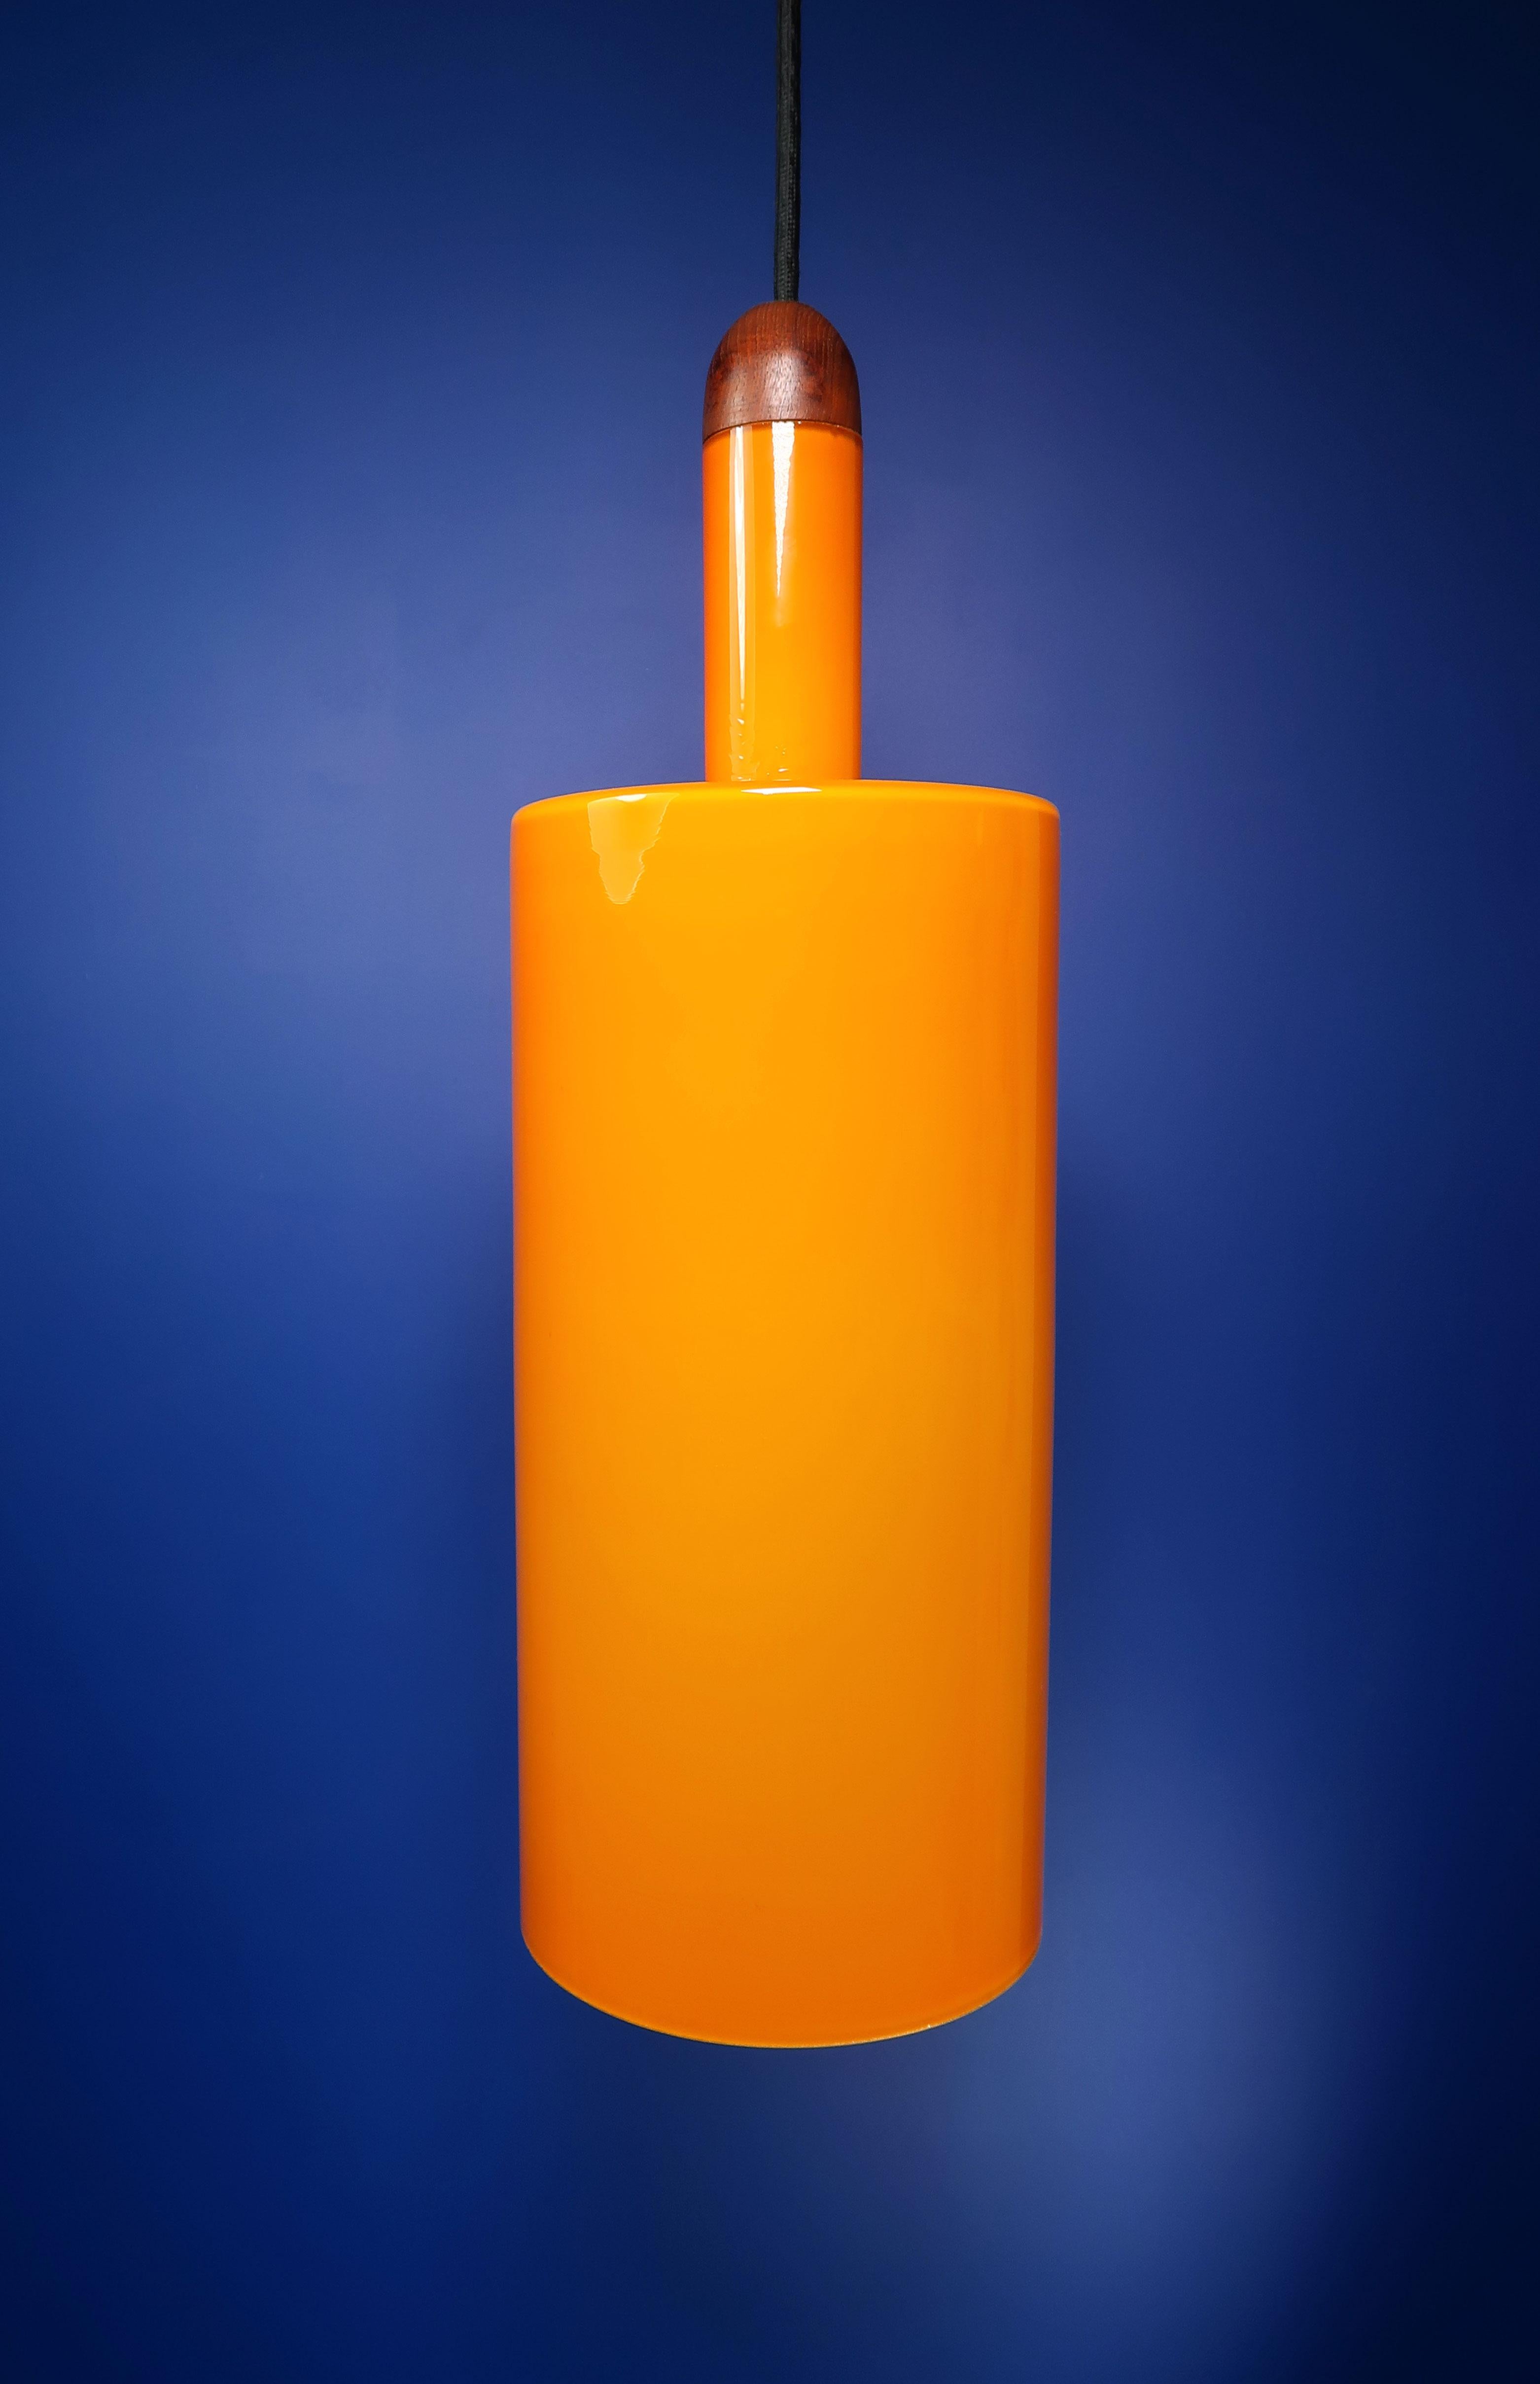 Danish midcentury modern orange / warm yellow glass pendant by acclaimed designer Johannes Hammerborg for Fog & Mørup with Danish Holmegaard glass. This model called Pisa (E 5924) was shown in the Fog & Morup catalogue in 1963 with the words: